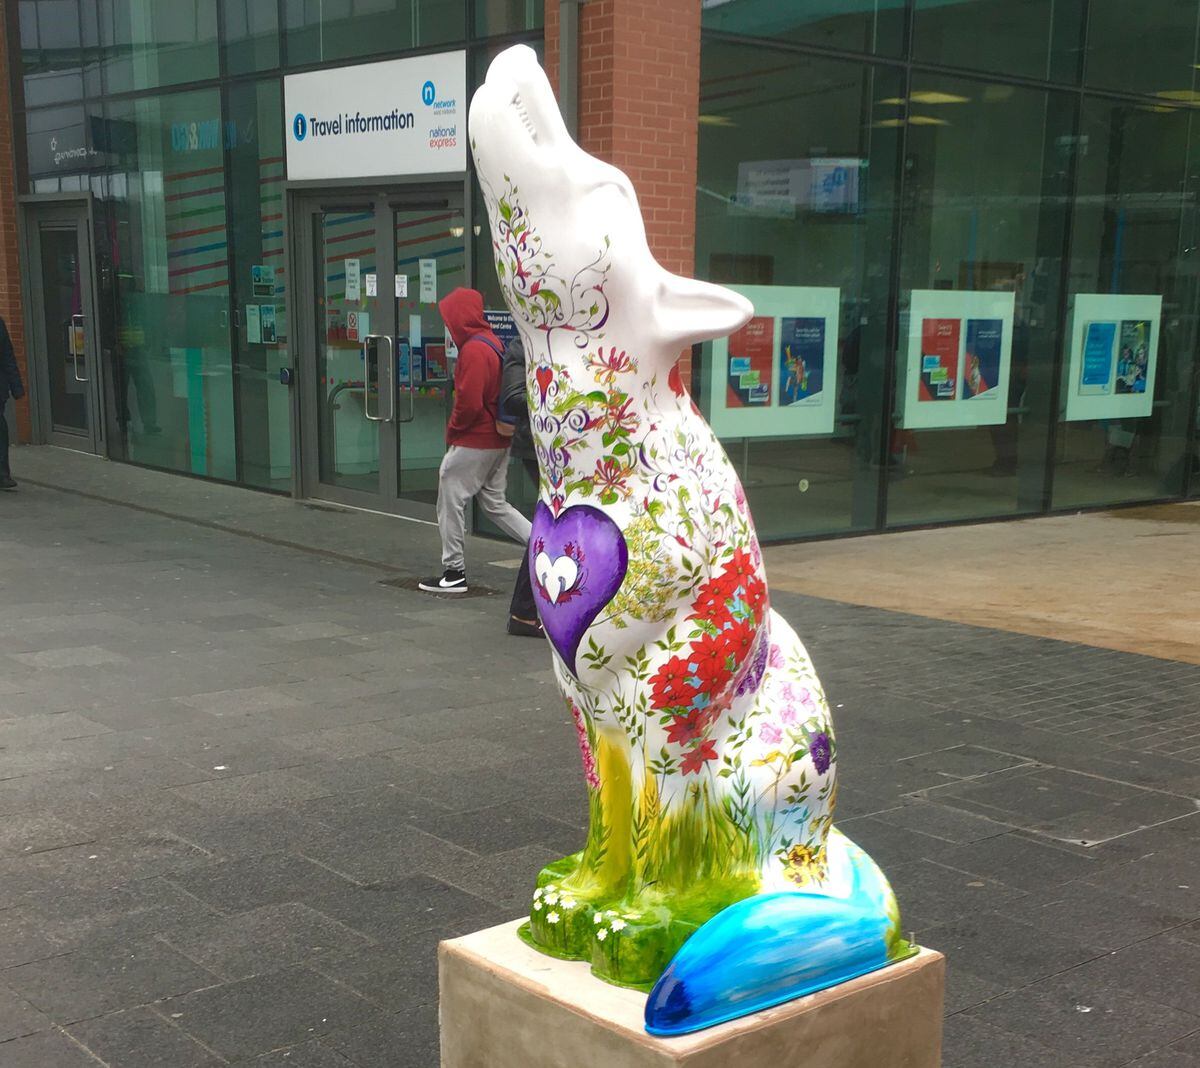 The 'Garden' Wolf near the city's bus station